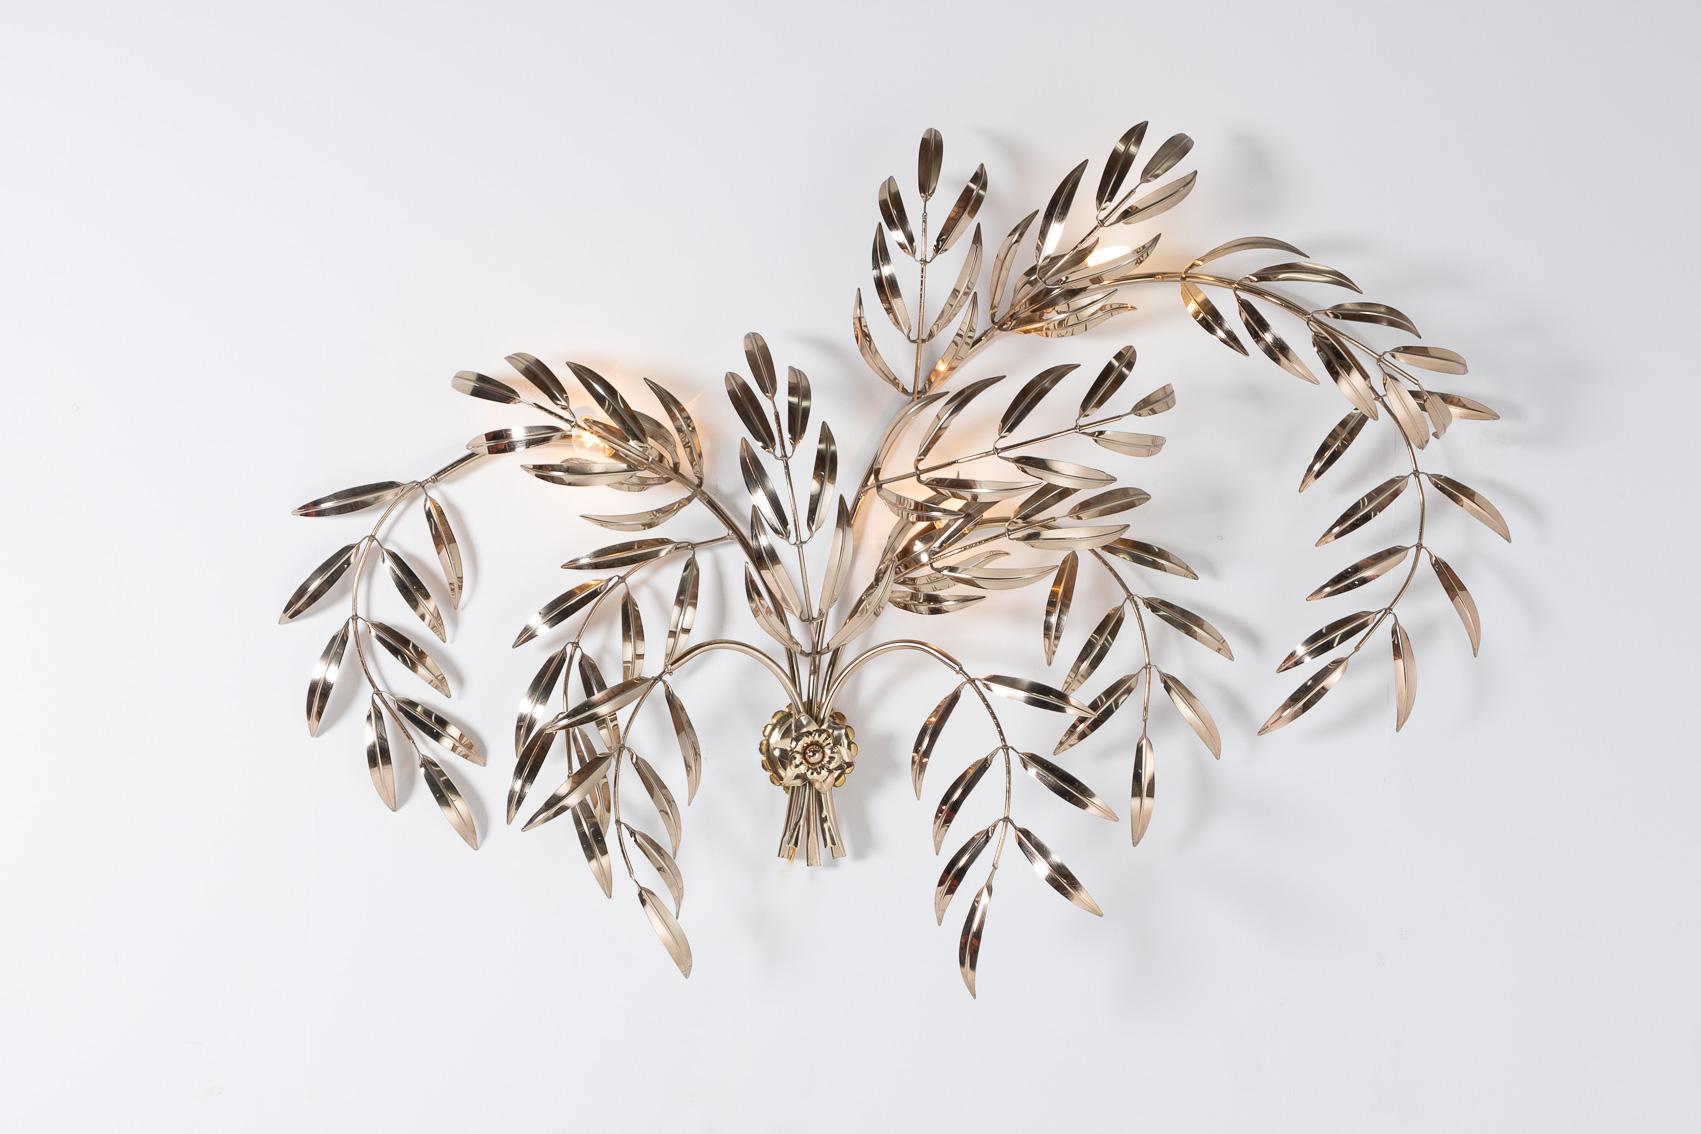 Sculptural gold colour coated steel floral lamp with 3 light spots. Impressive piece for exclusive wall decor.

Condition
Good, usage marks.

Dimensions
width: 140 cm
depth: 30 cm
height: 100 cm